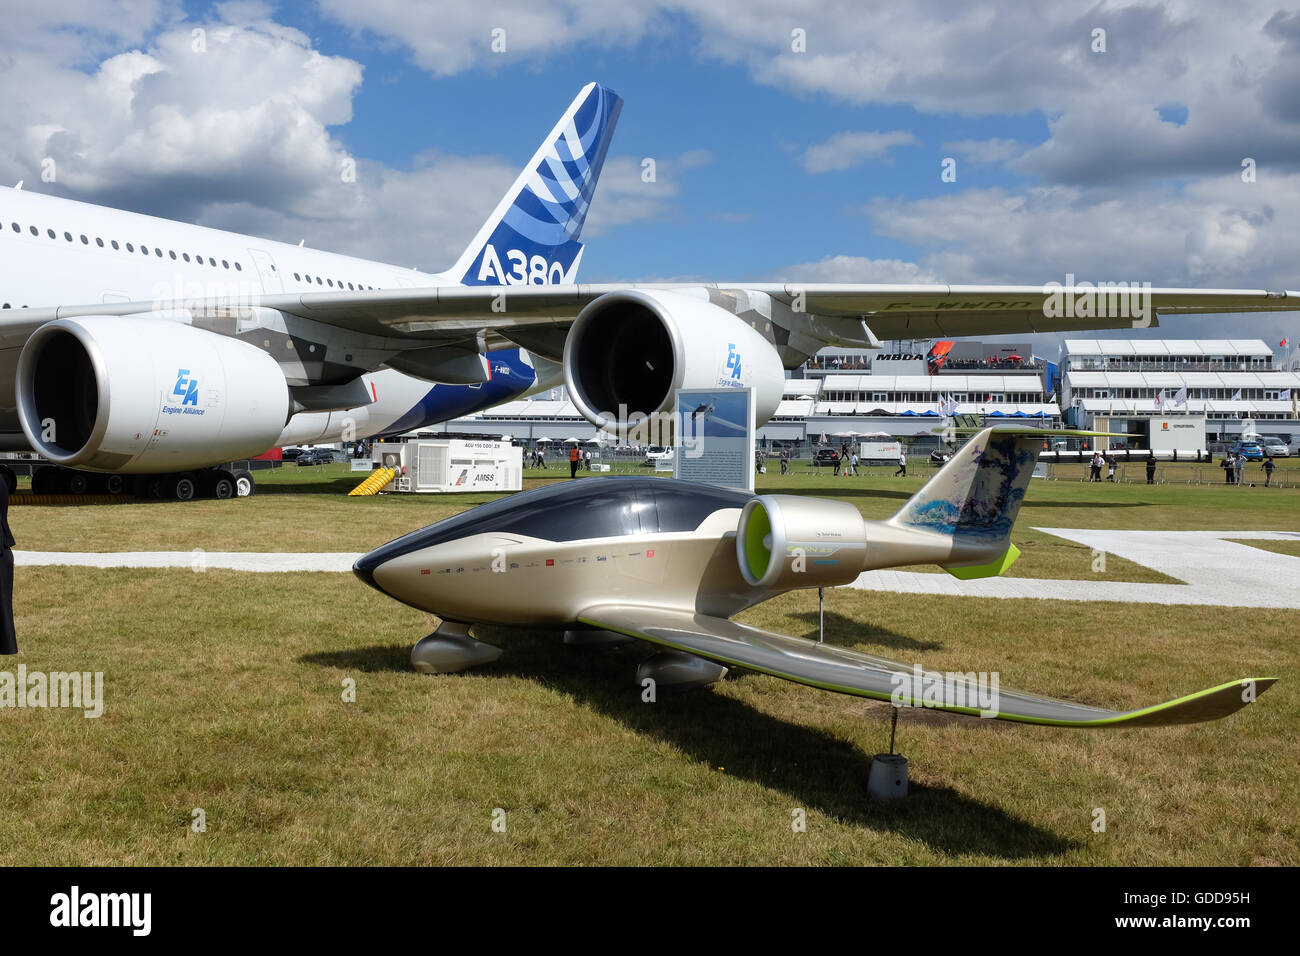 The Airbus E-Fan plane beside the much larger Airbus A380. Stock Photo